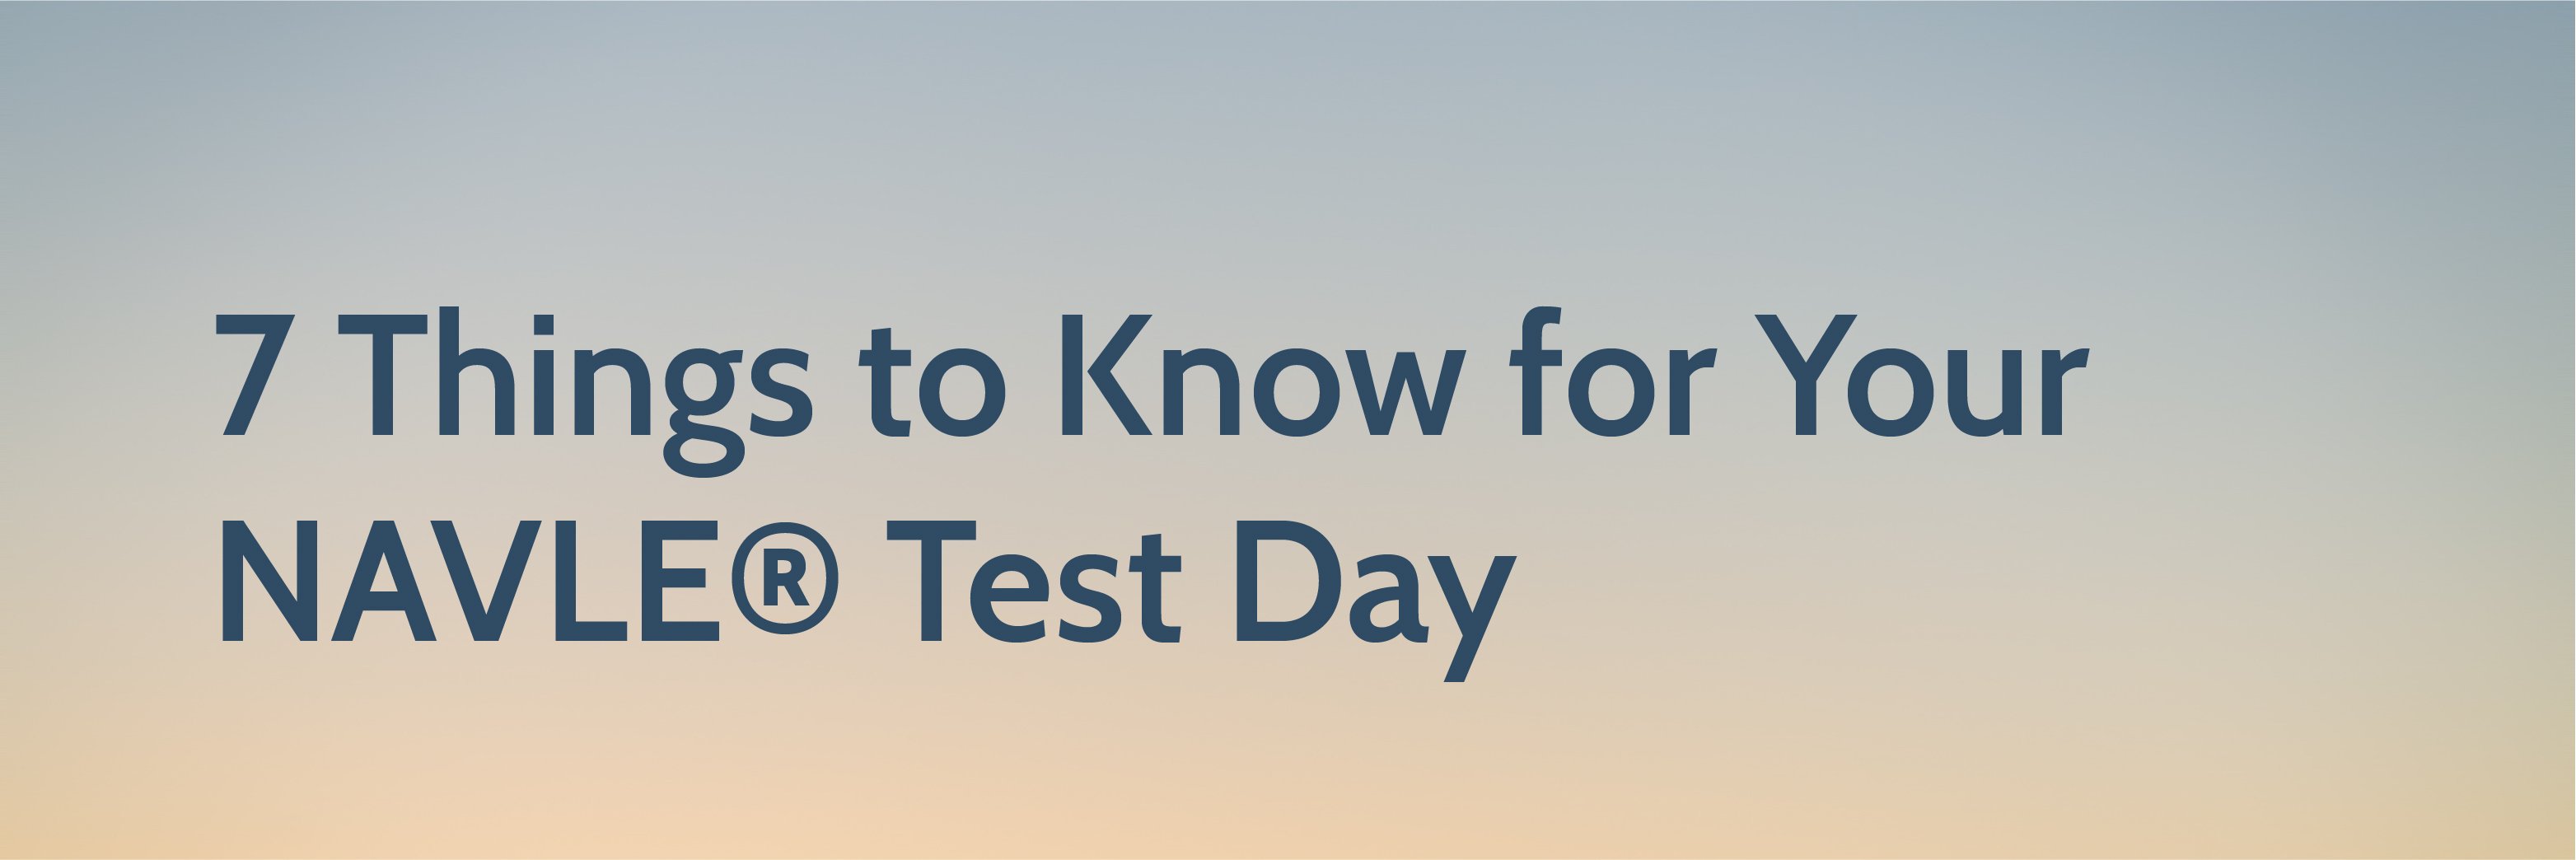 7 Things to Know for Your NAVLE Test Day